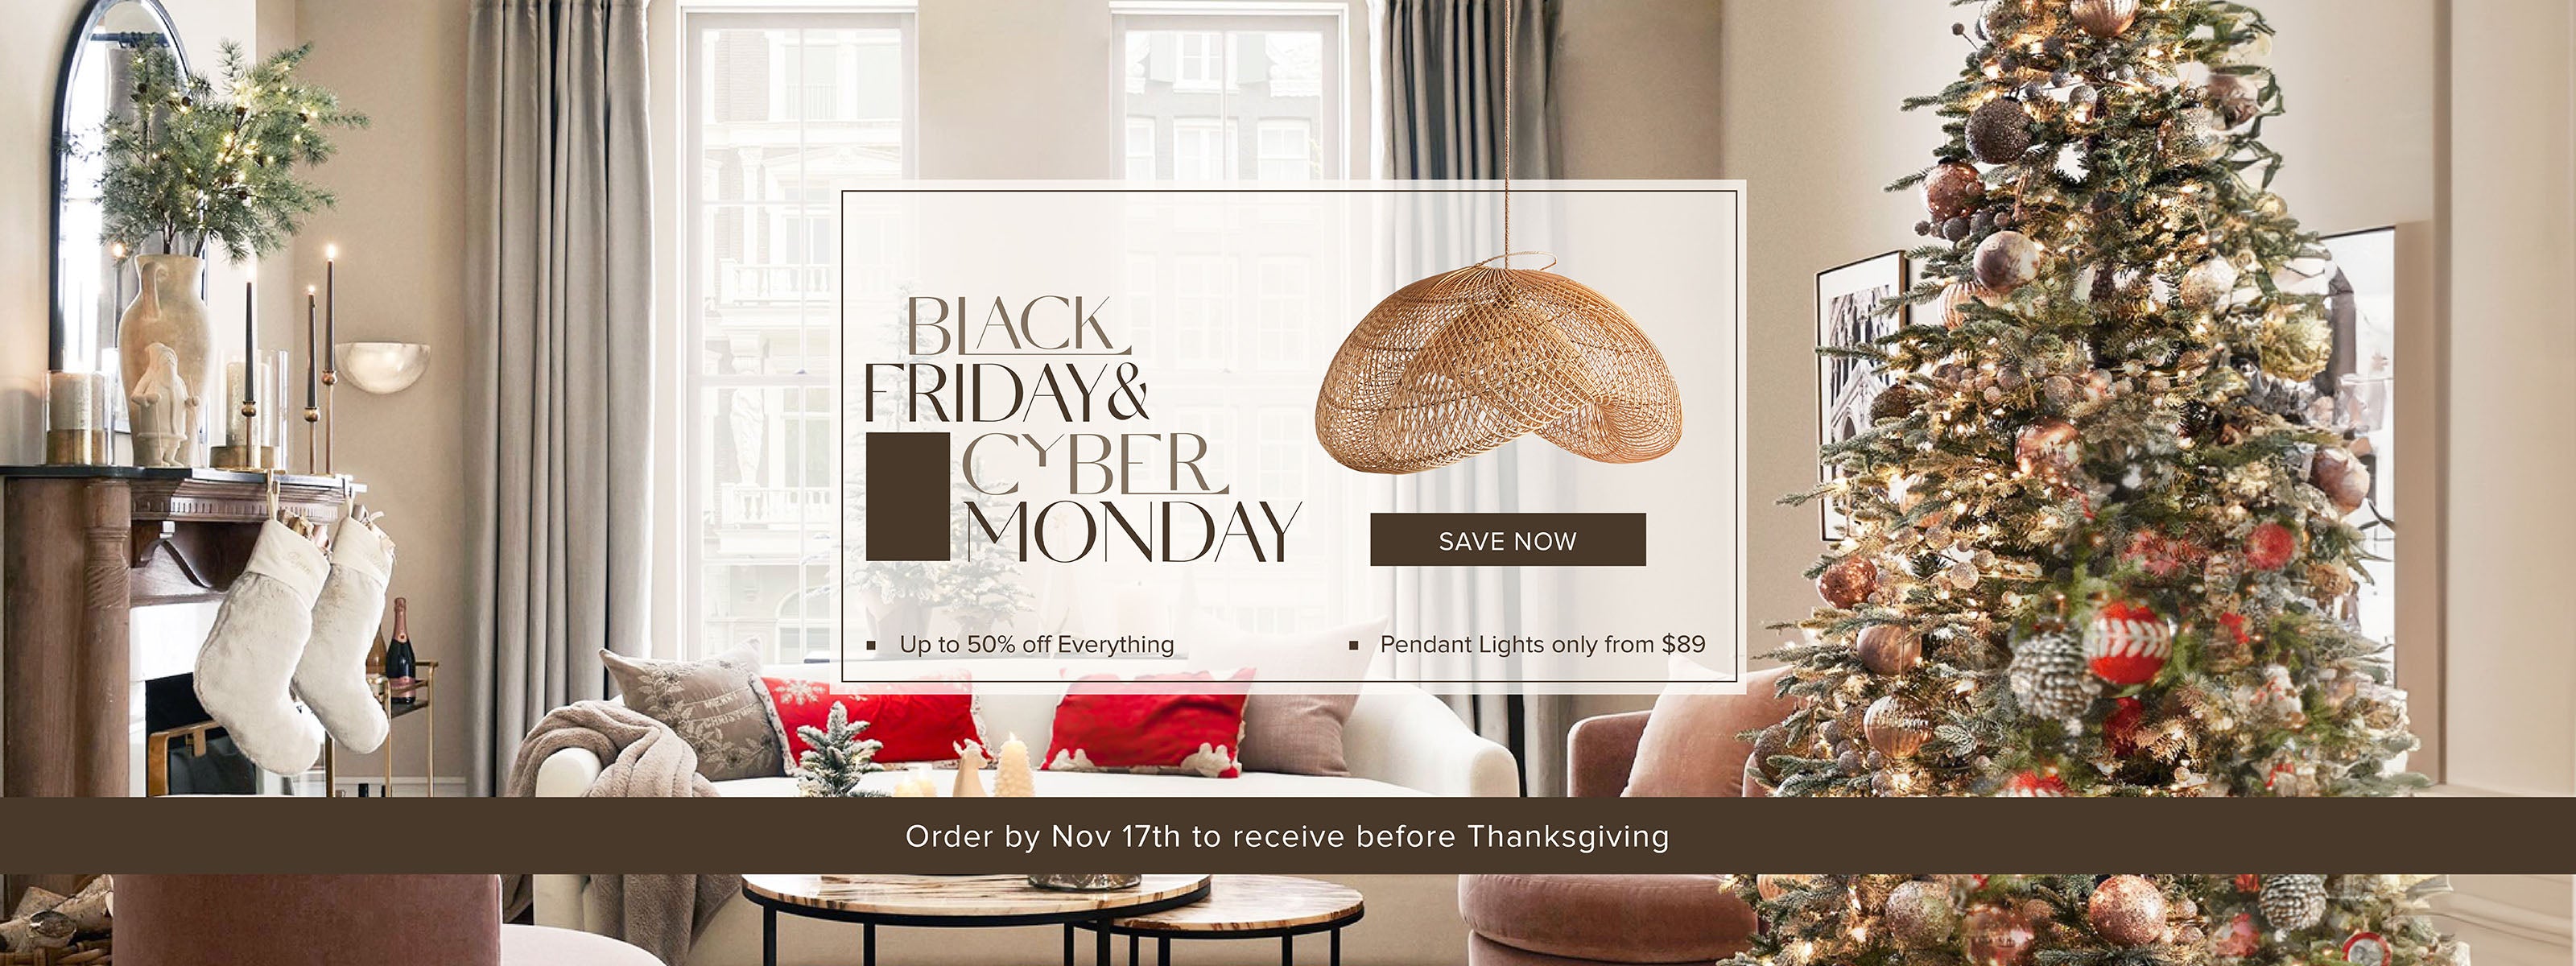 home-page-banner-black-friday-and-cyber-monday